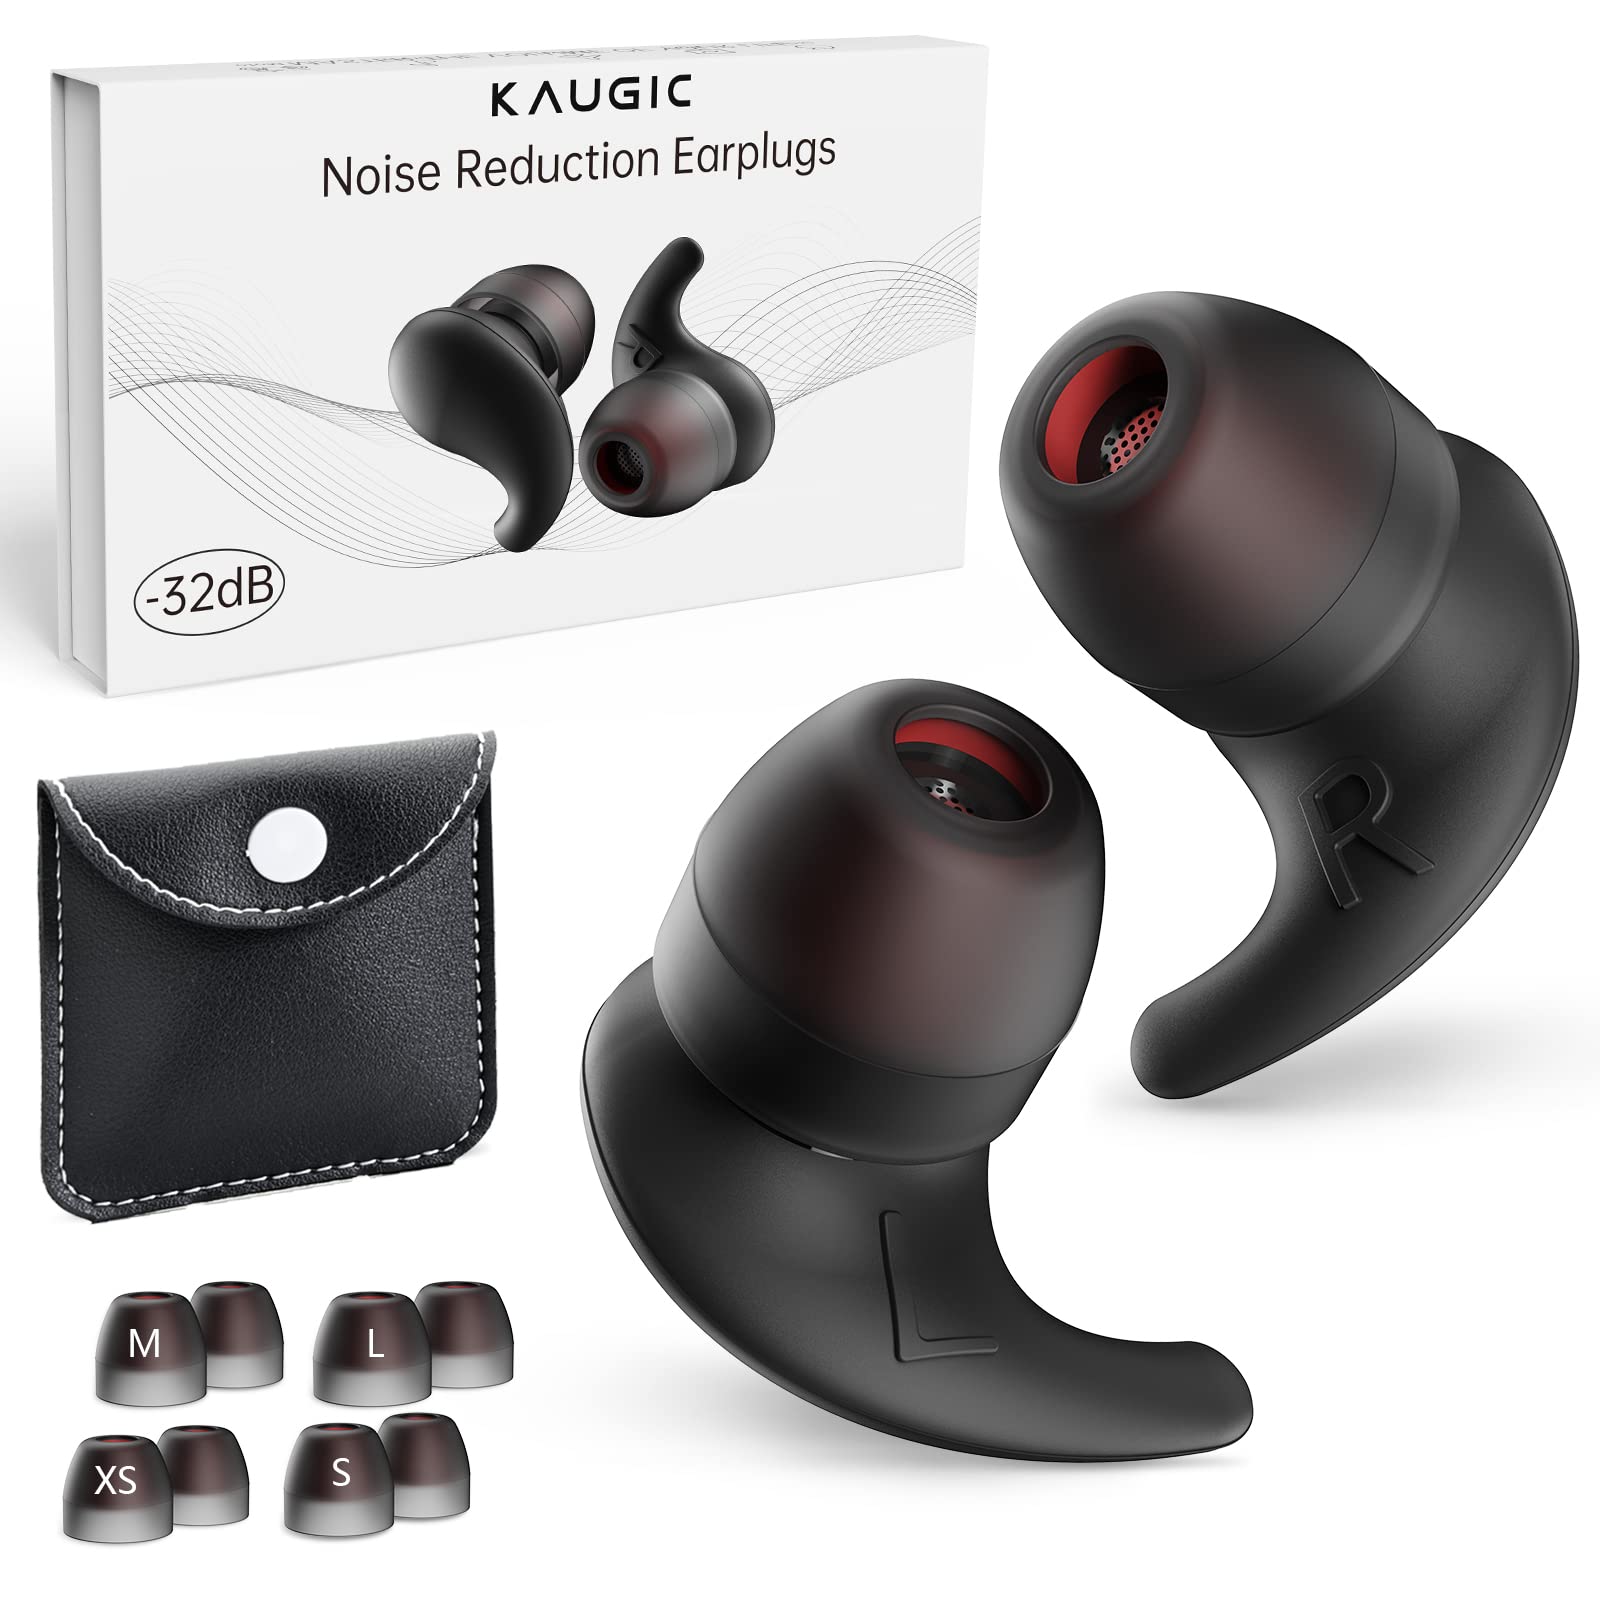 KAUGIC Ear Plugs for Noise Reduction Soft Reusable Sleeping Ear Plugs - Hearing  Protection in Silicone for Sleep Travel Work Concerts & Flights - 8 Ear  Tips in XS/S/M/L Black On-Ear